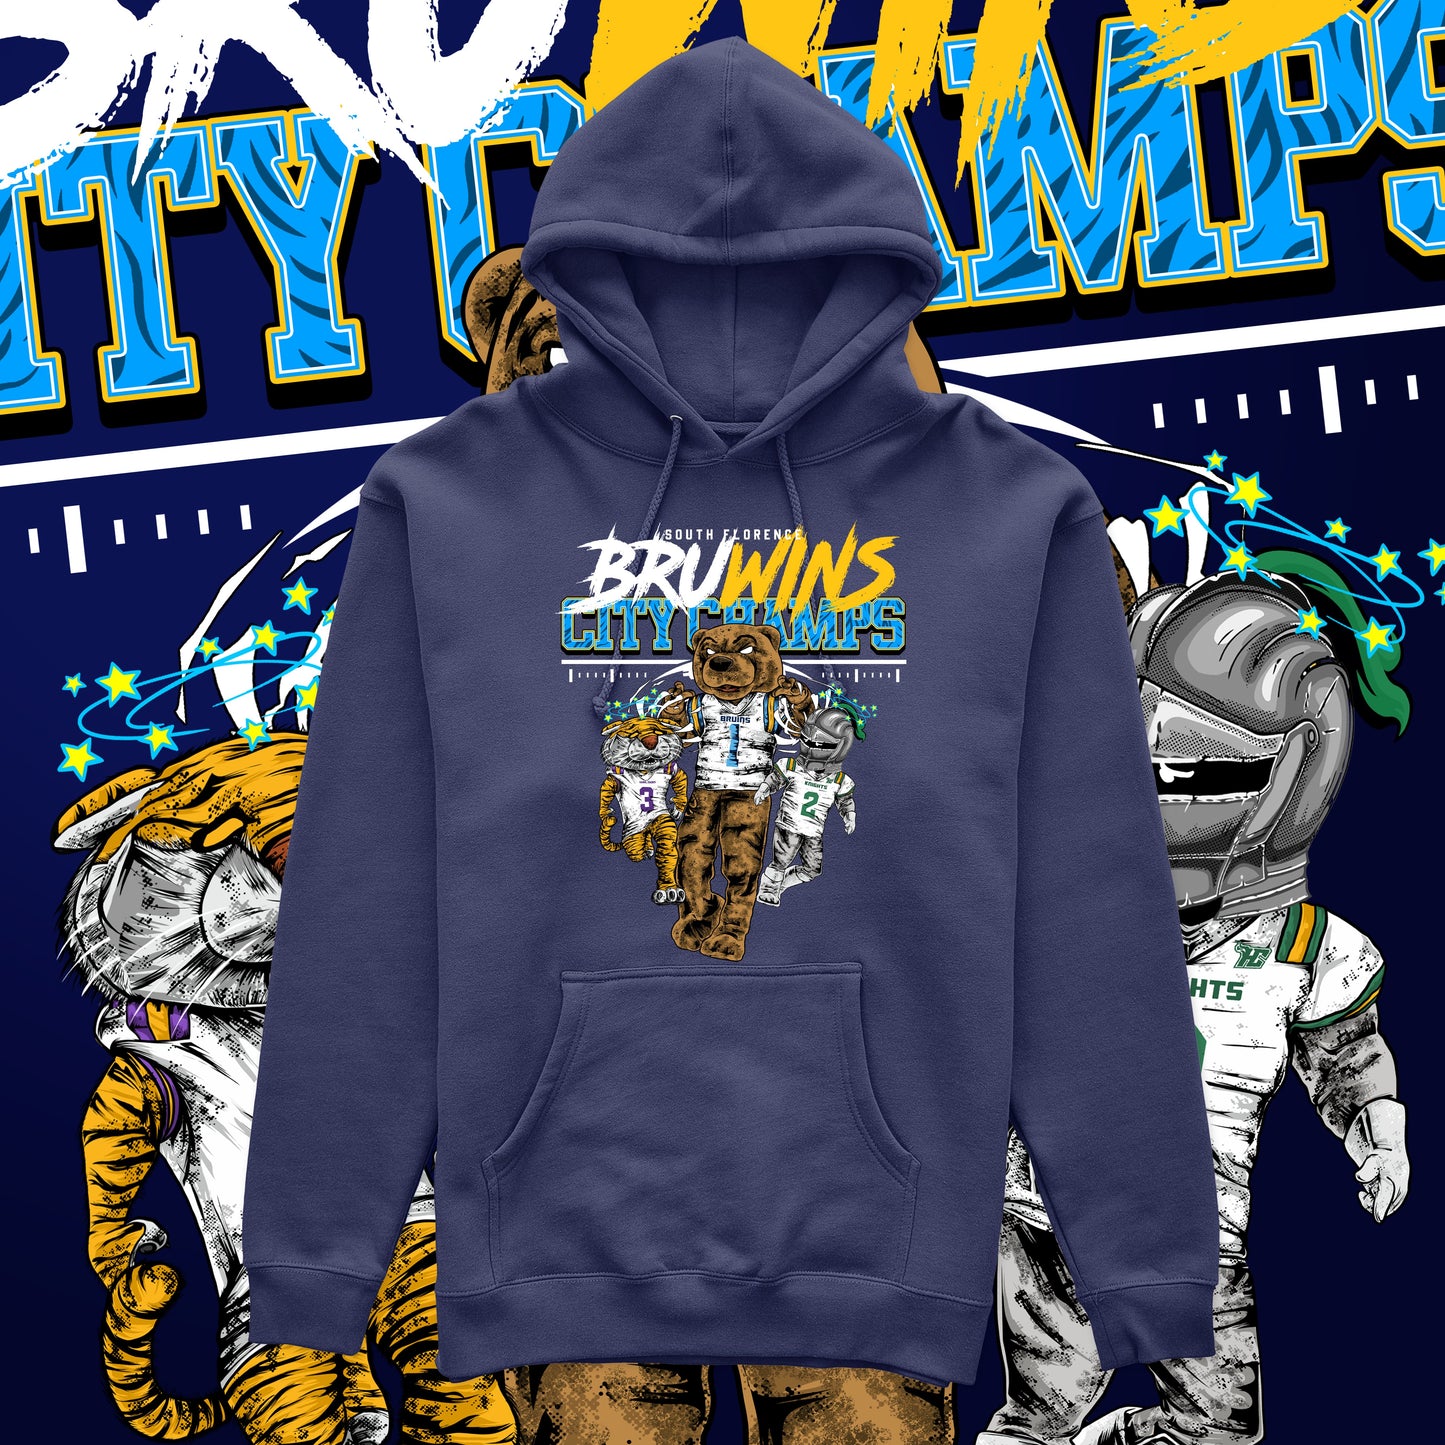 Bruwins City Champs 2023 (Mesmerized) - Hoodie